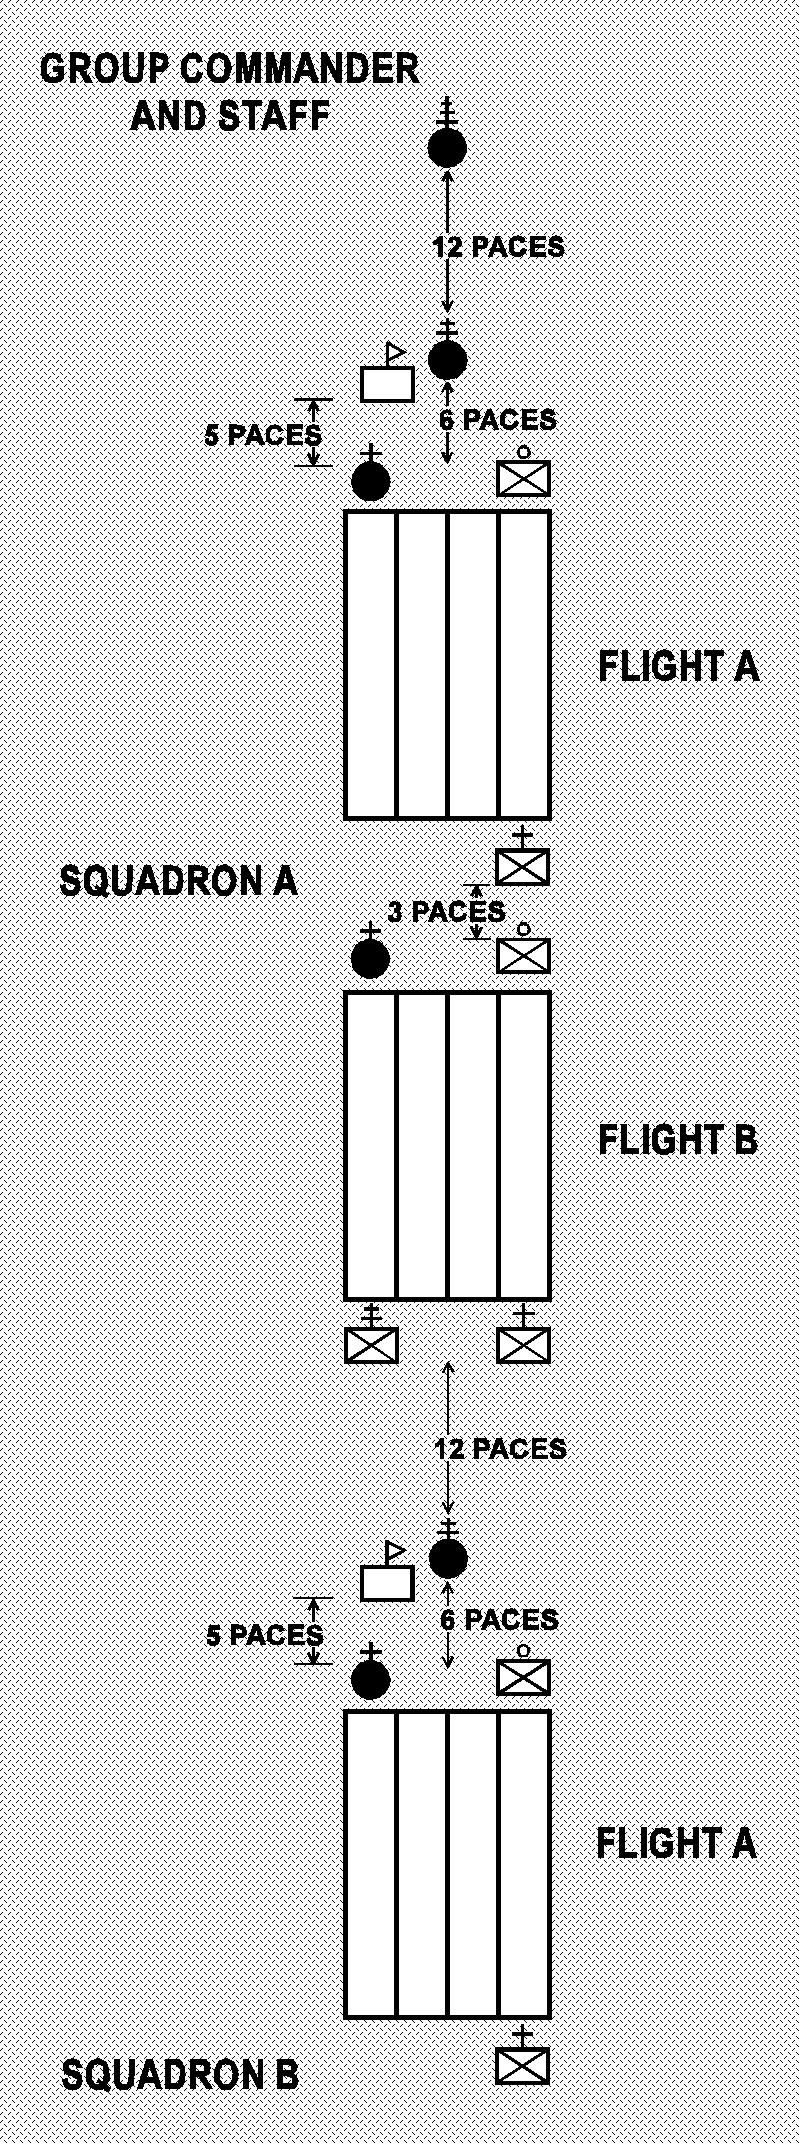 72 CAPP 60-33 5 AUGUST 2016 6.2. Composition of the Staff. 6.2.1. The squadron is the smallest formation with a staff, but it is highly unusual for a squadron staff to post in formation.